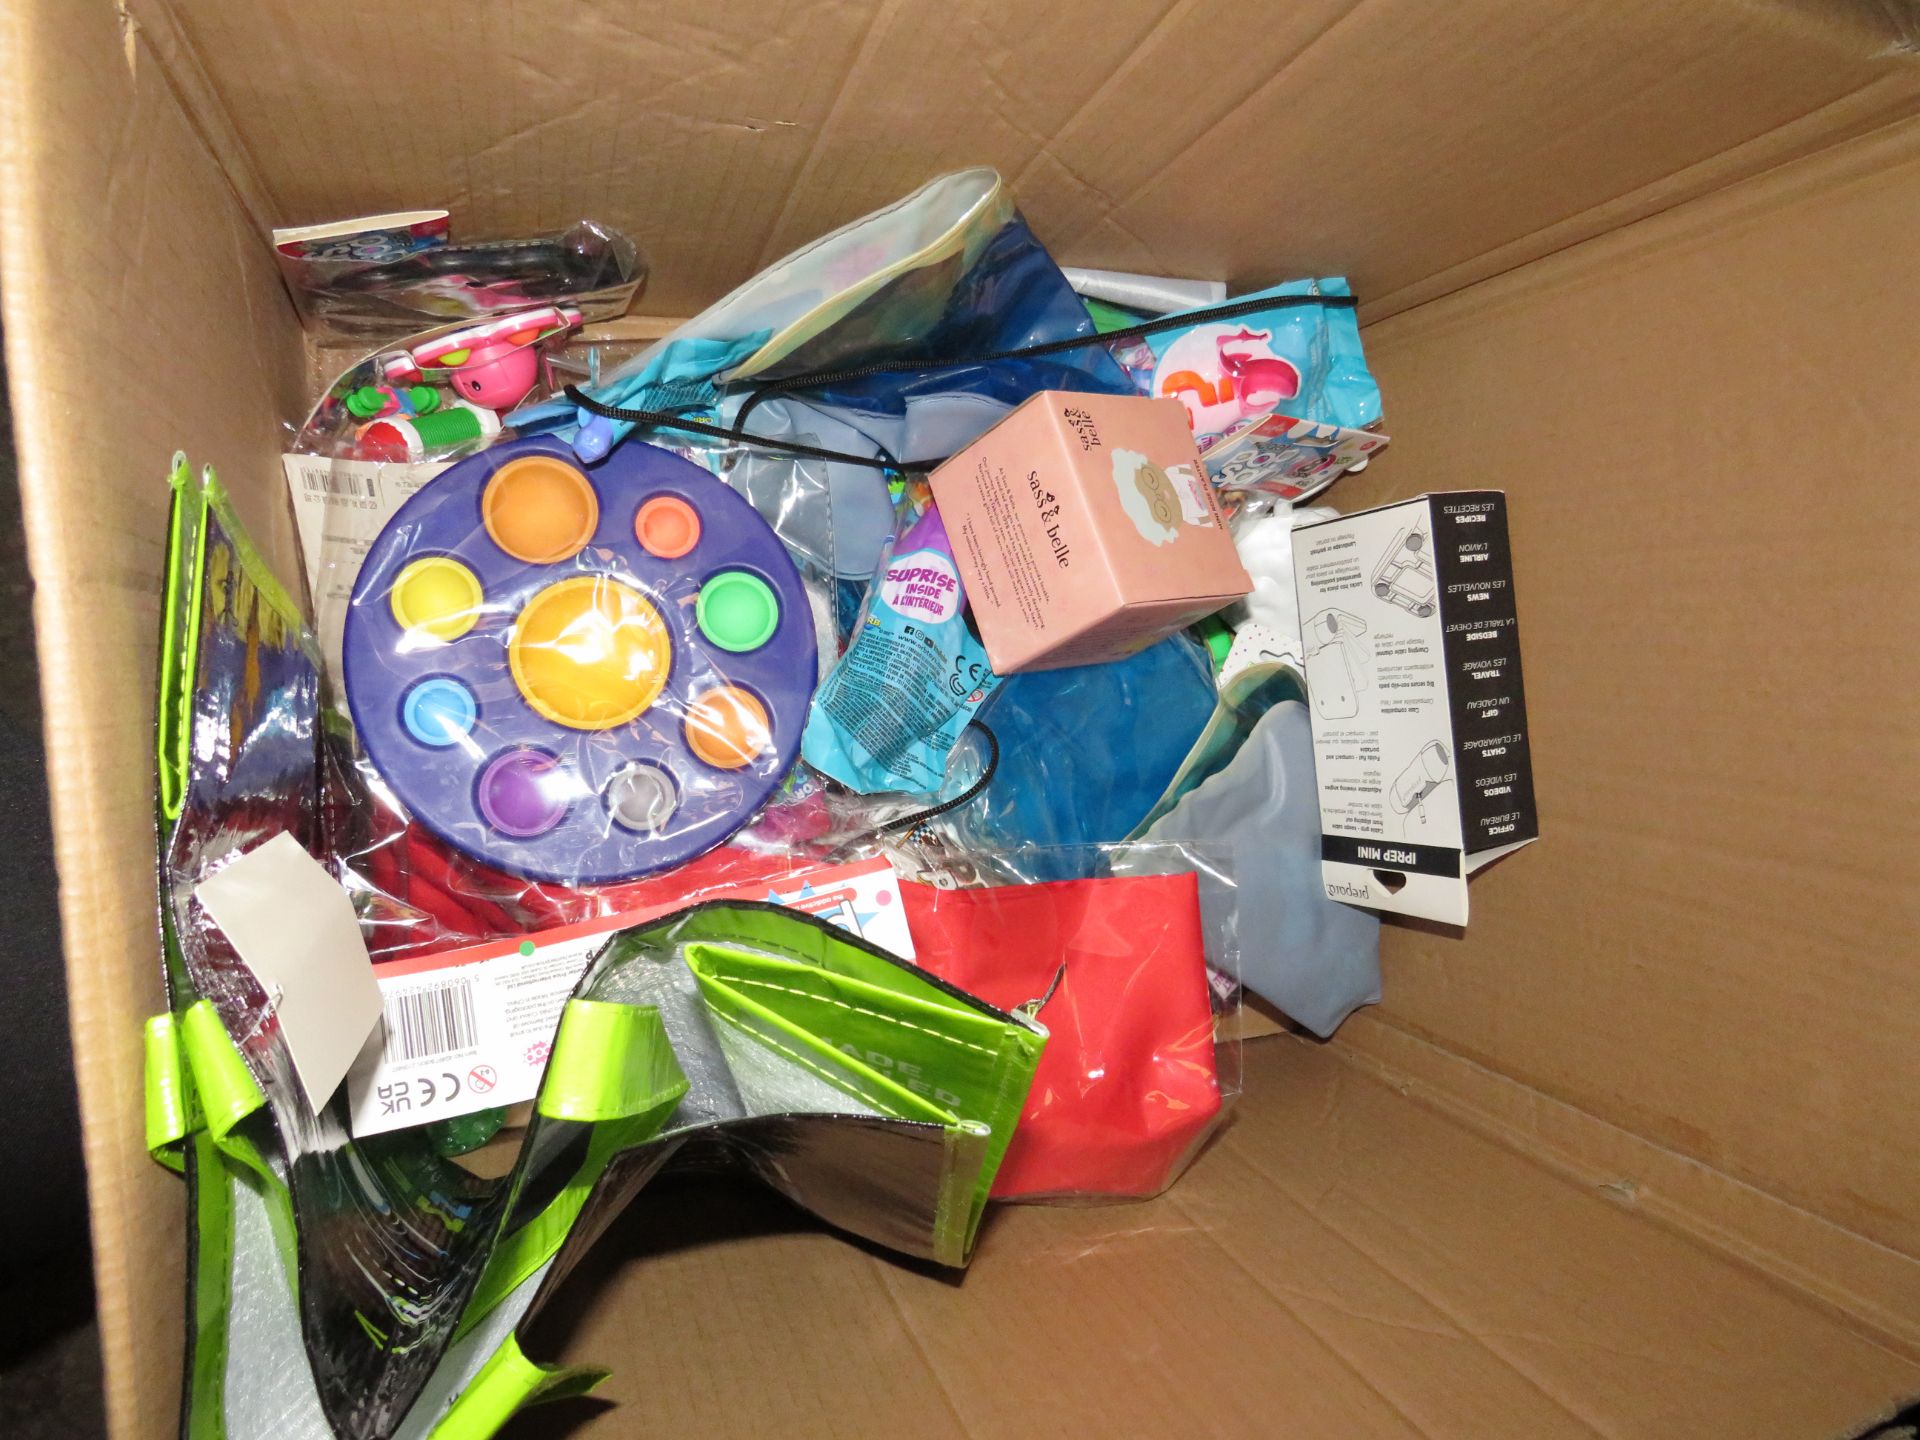 1x Box Containing Various Assorted Items - Conditions May Vary, Viewing Recommended.